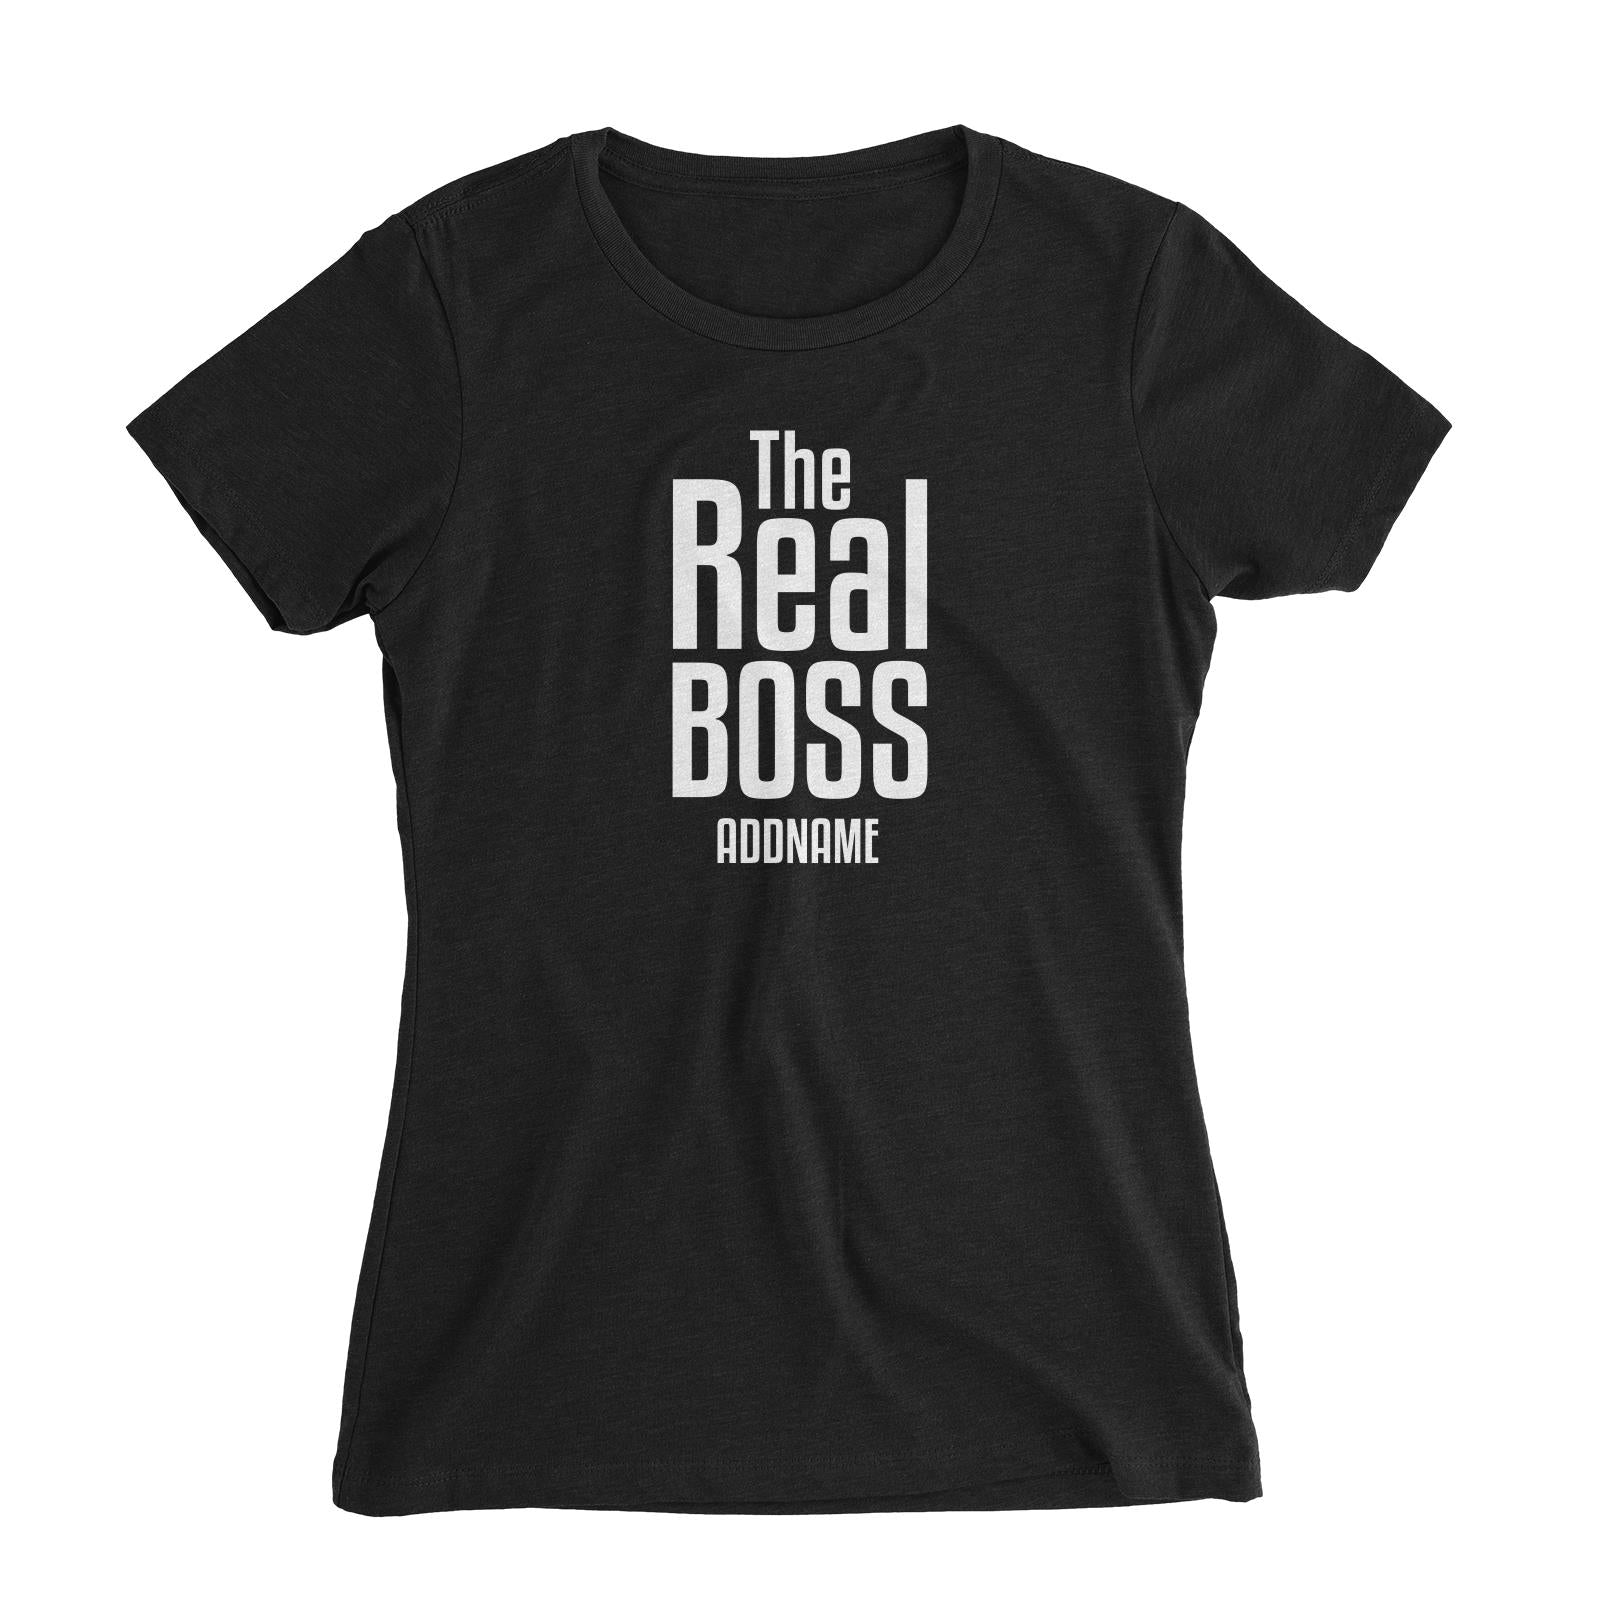 The Real Boss Women's Slim Fit T-Shirt